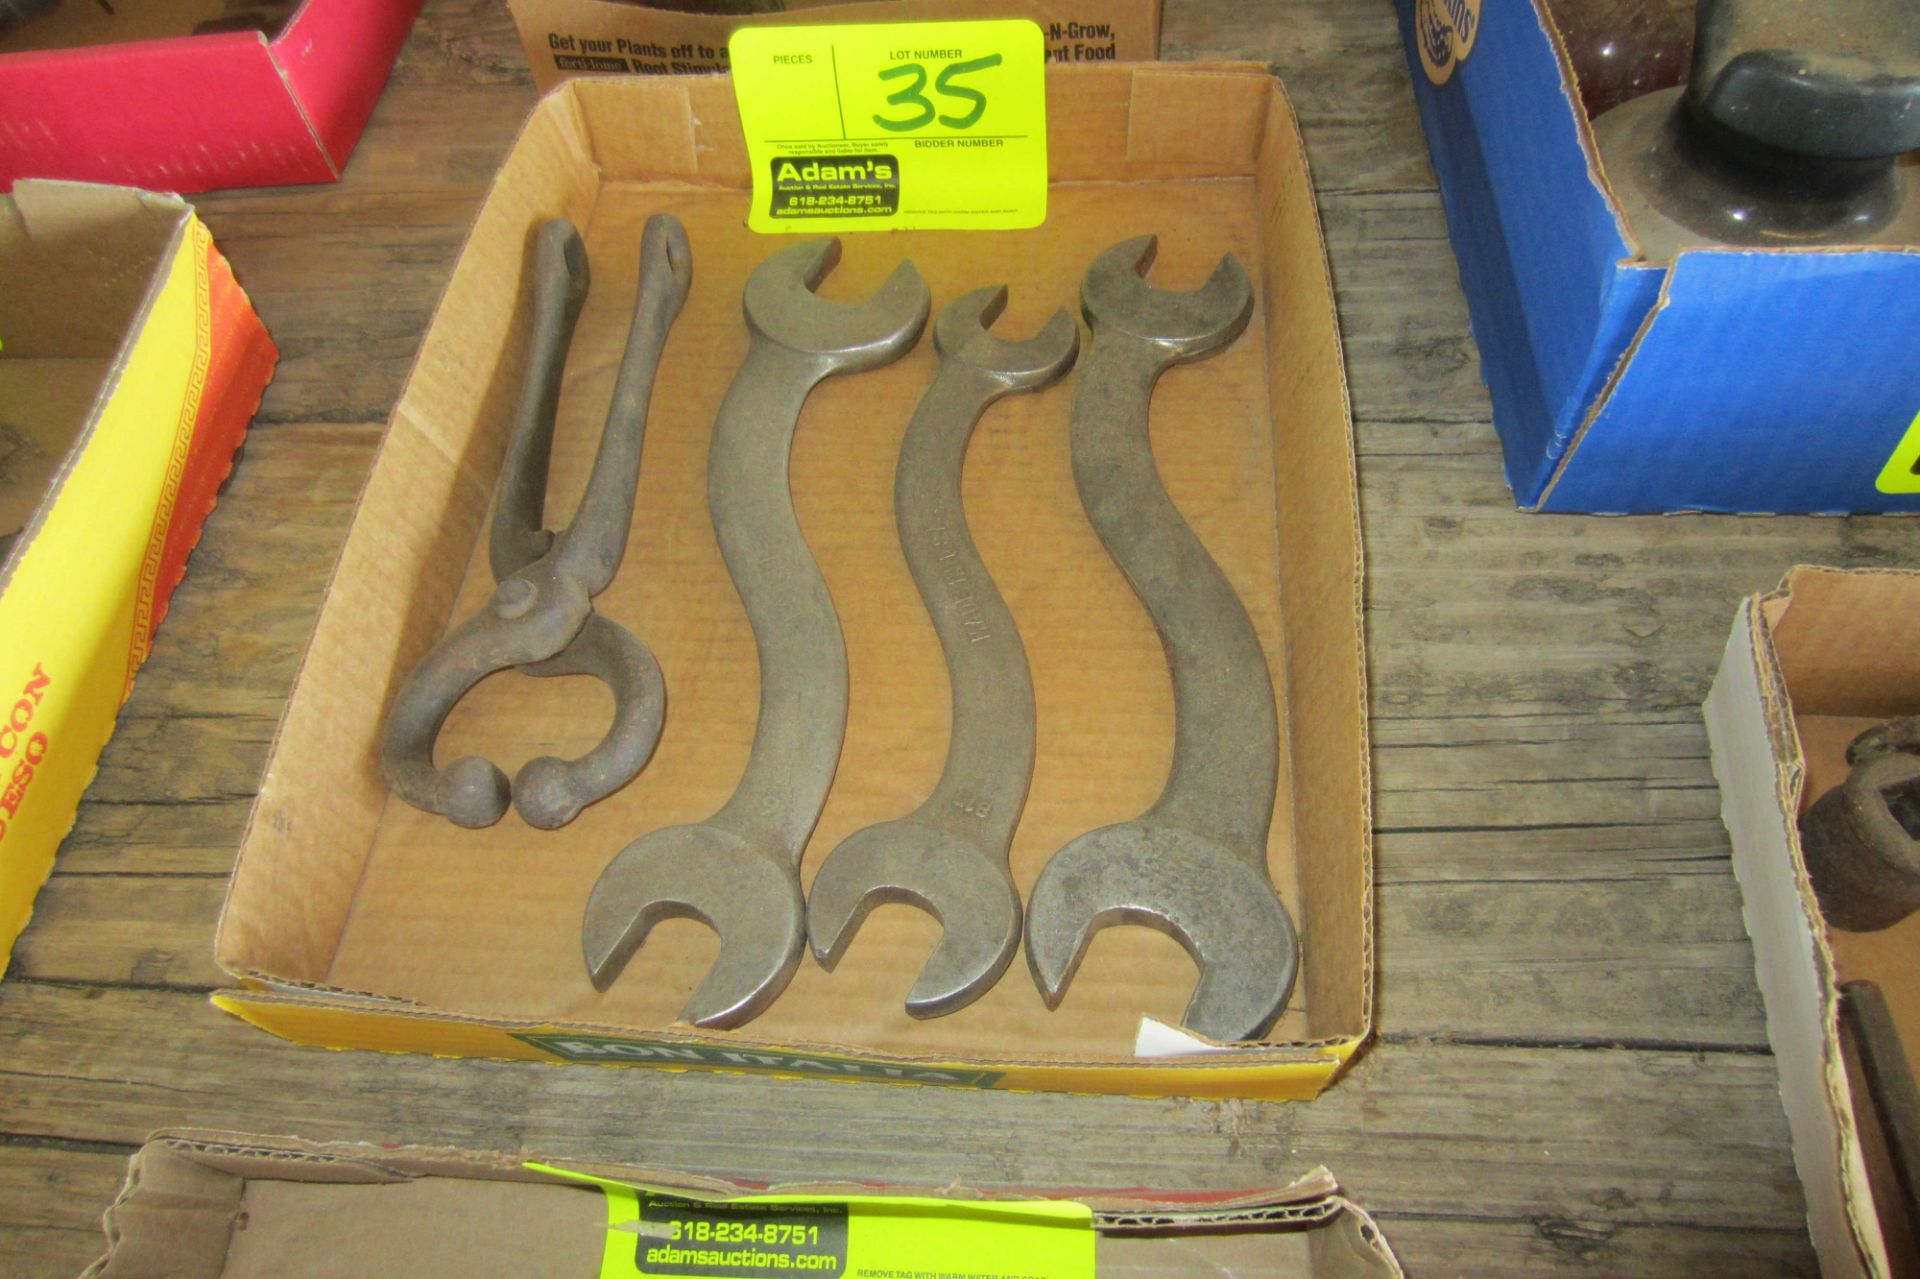 3 USA Wrenches, Pincers